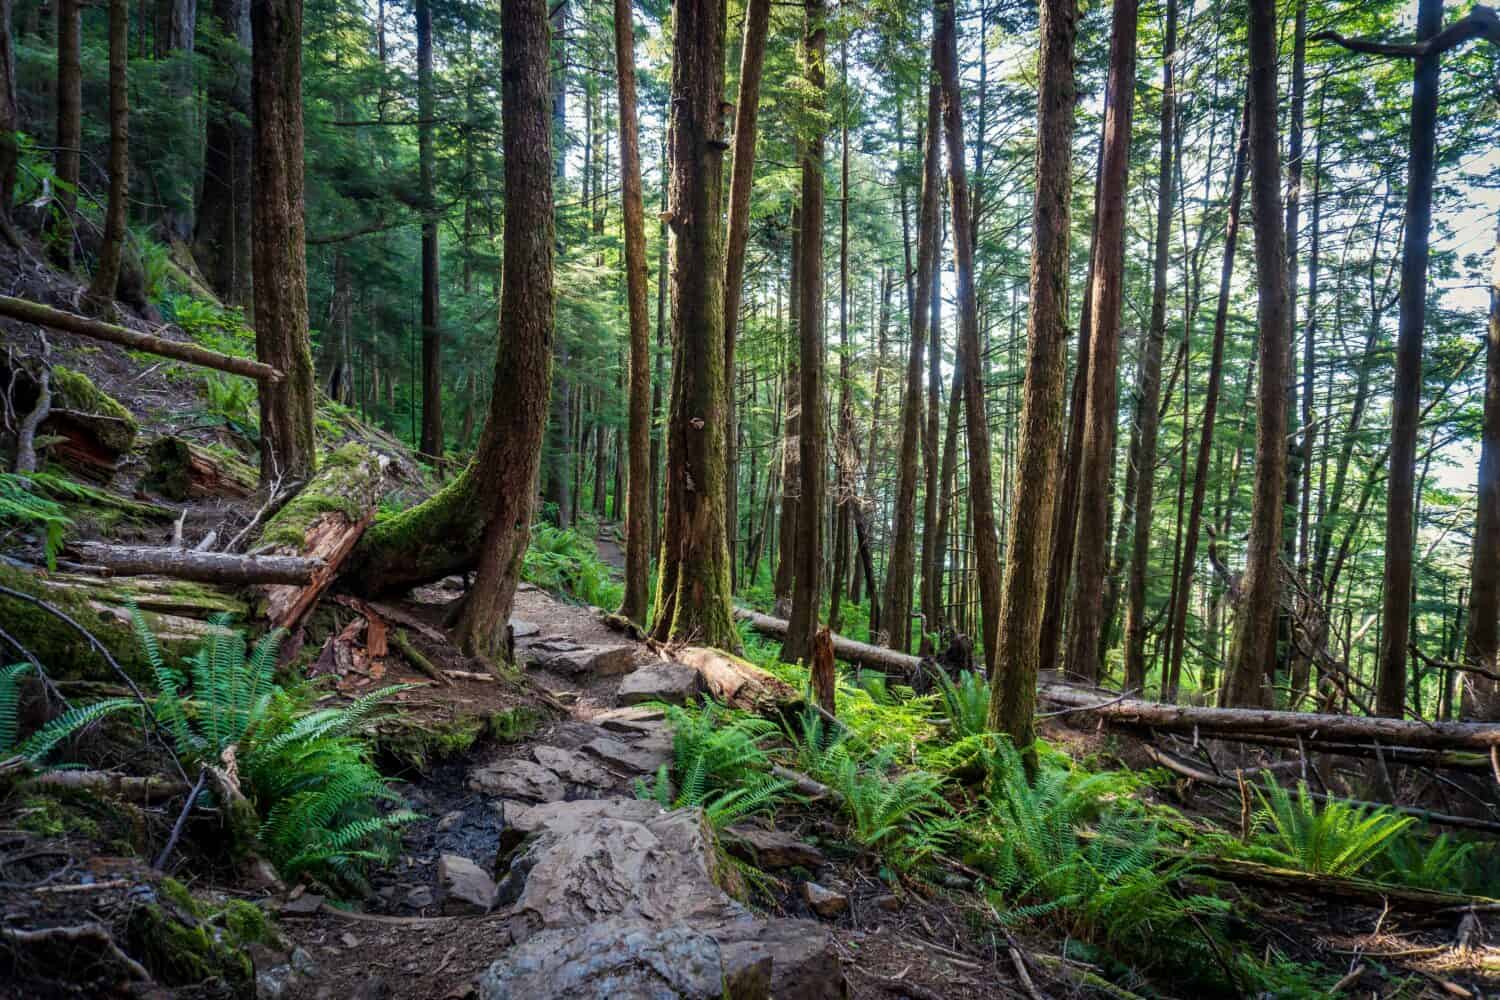 Rainbird Hiking Trail in Tongass National Forest in Ketchikan, Alaska. Sitka spruce, ferns, and rocky trail through temperate rain forest.  